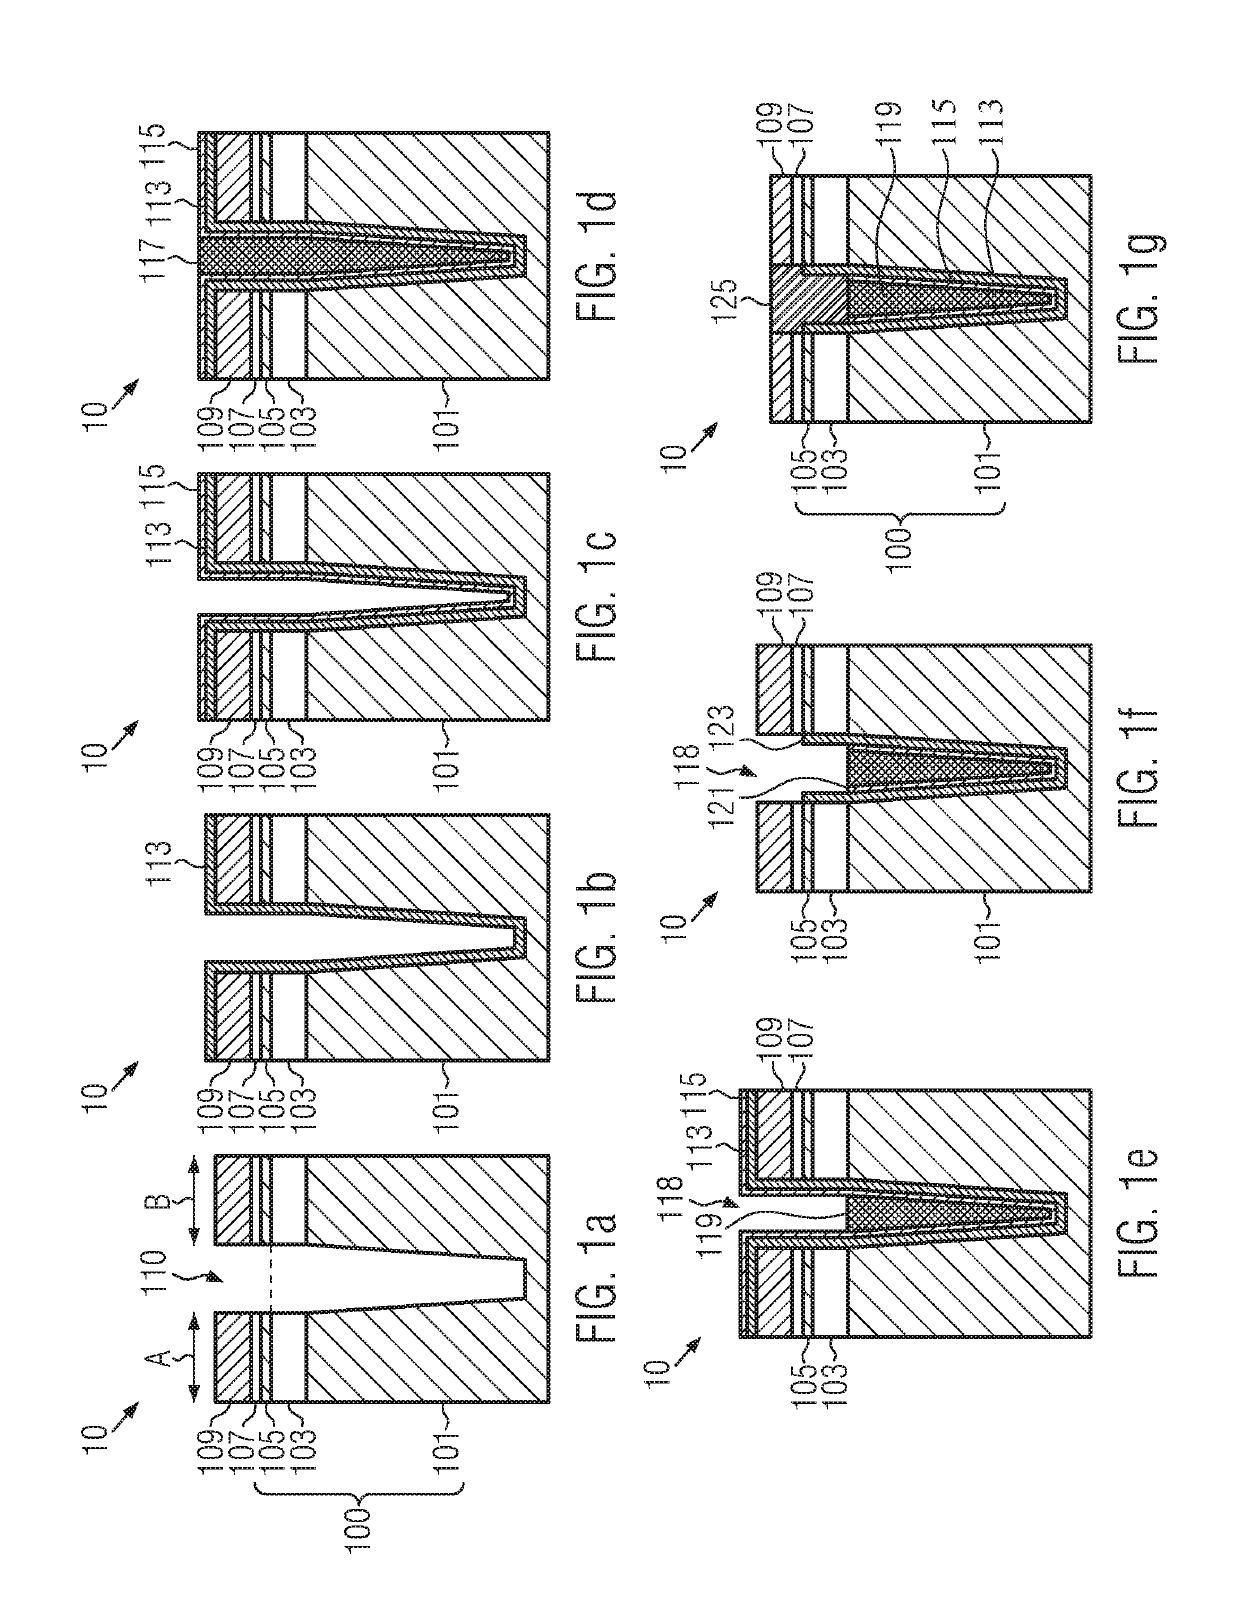 Front-end-of-line device structure and method of forming such a front-end-of-line device structure